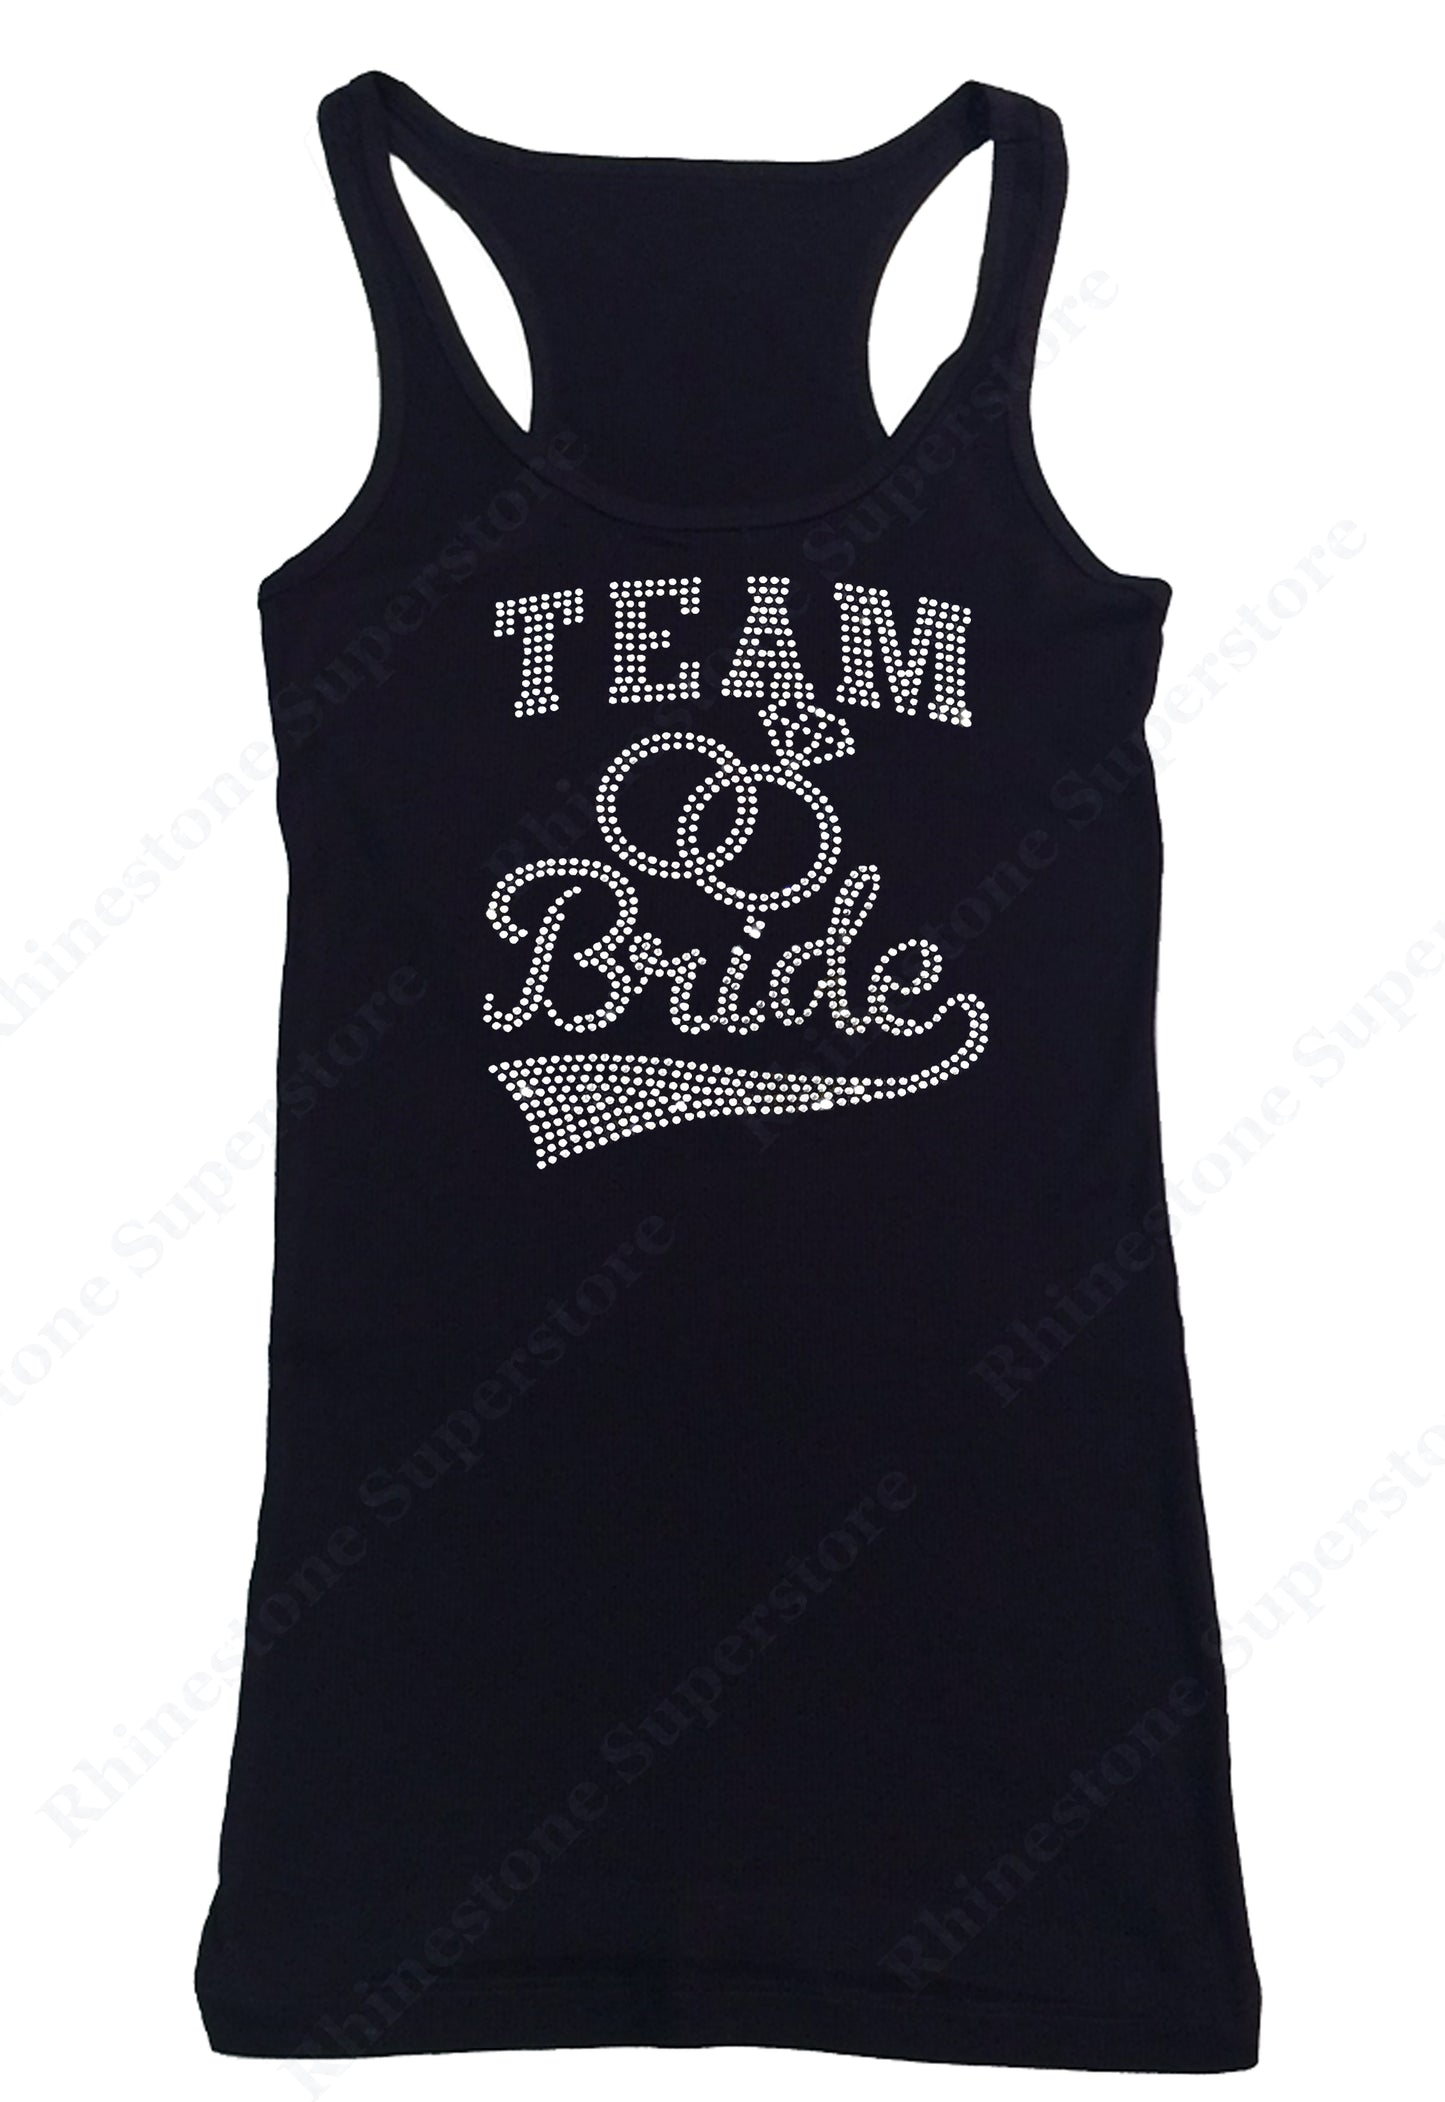 Womens T-shirt with Team Bride with Rings in Rhinestones